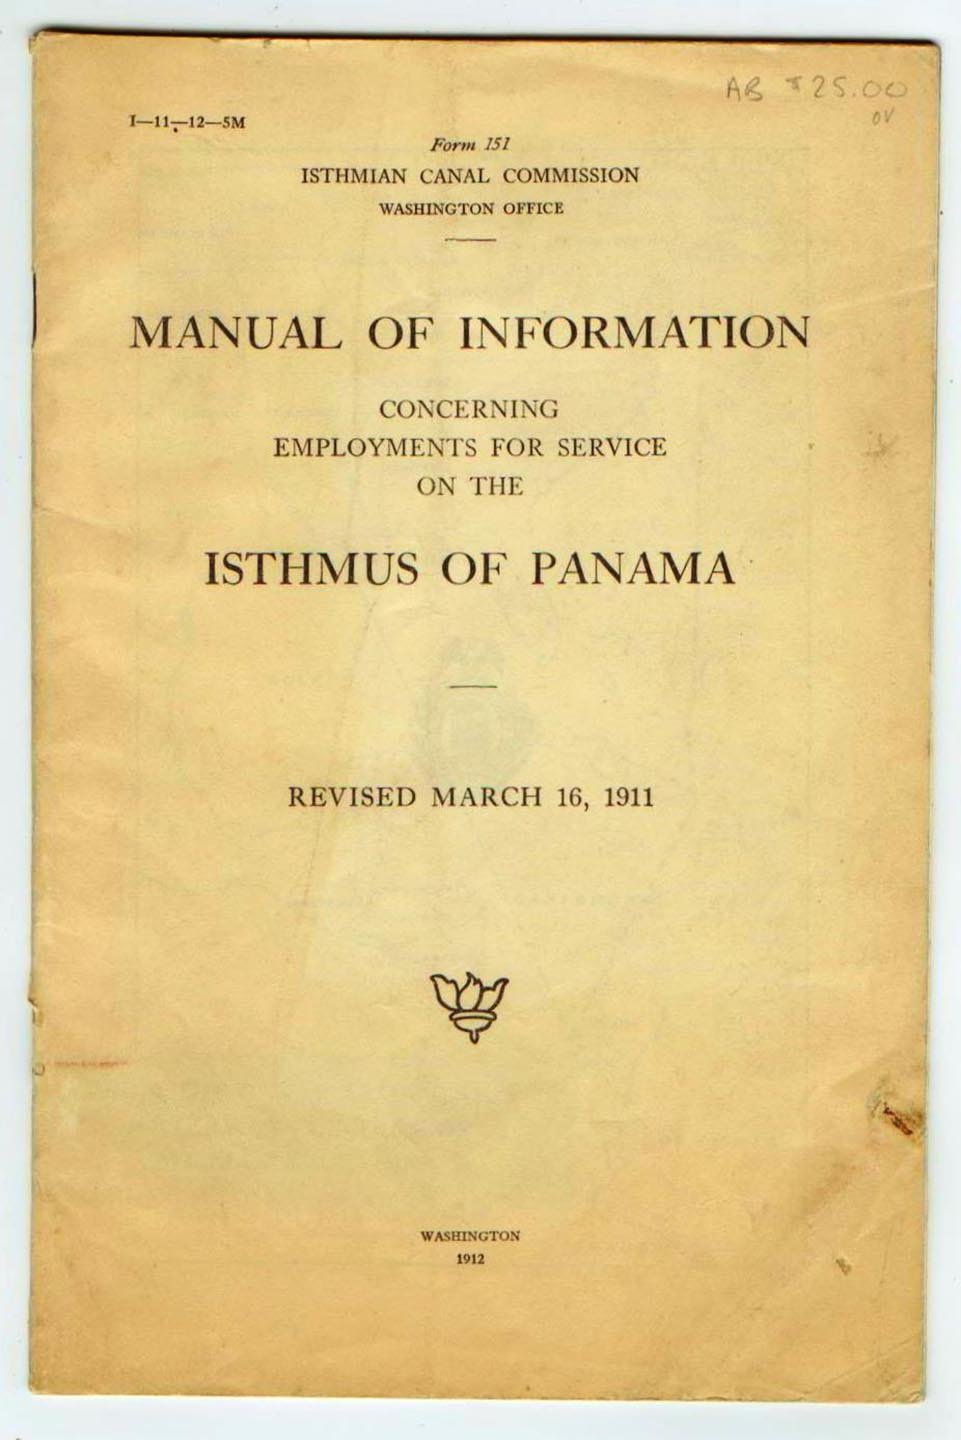 Manual of Information Concerning Employments for Service on the Isthmus of Panama. Revised March 16, 1911